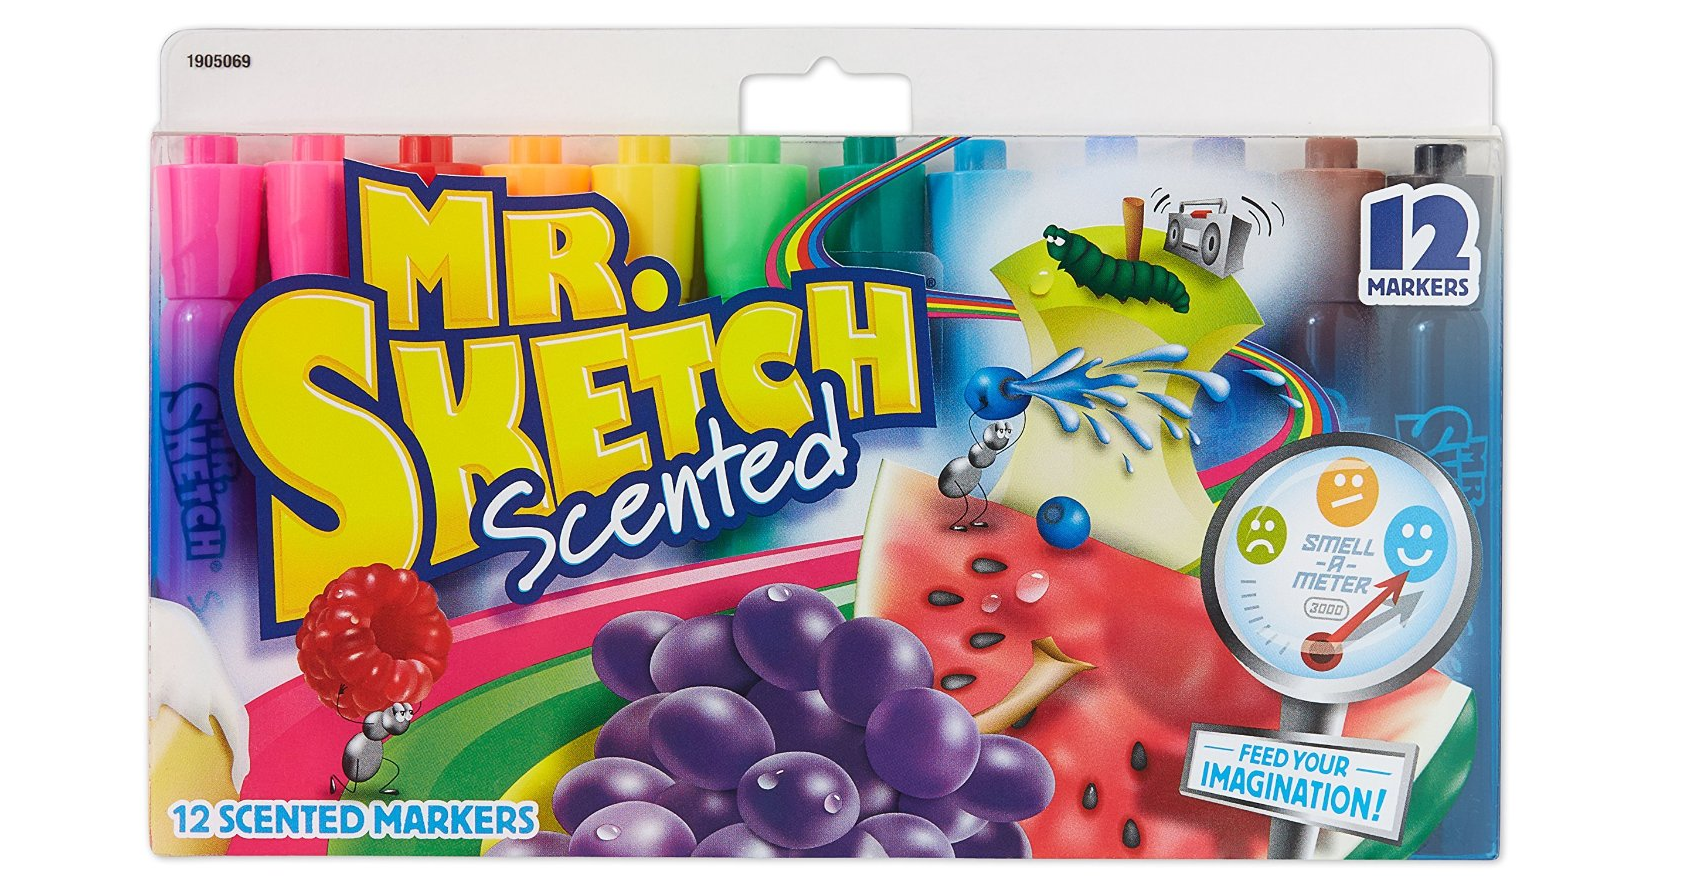 Mr. Sketch Scented Markers 12 Pack Only $5.08 on Amazon!